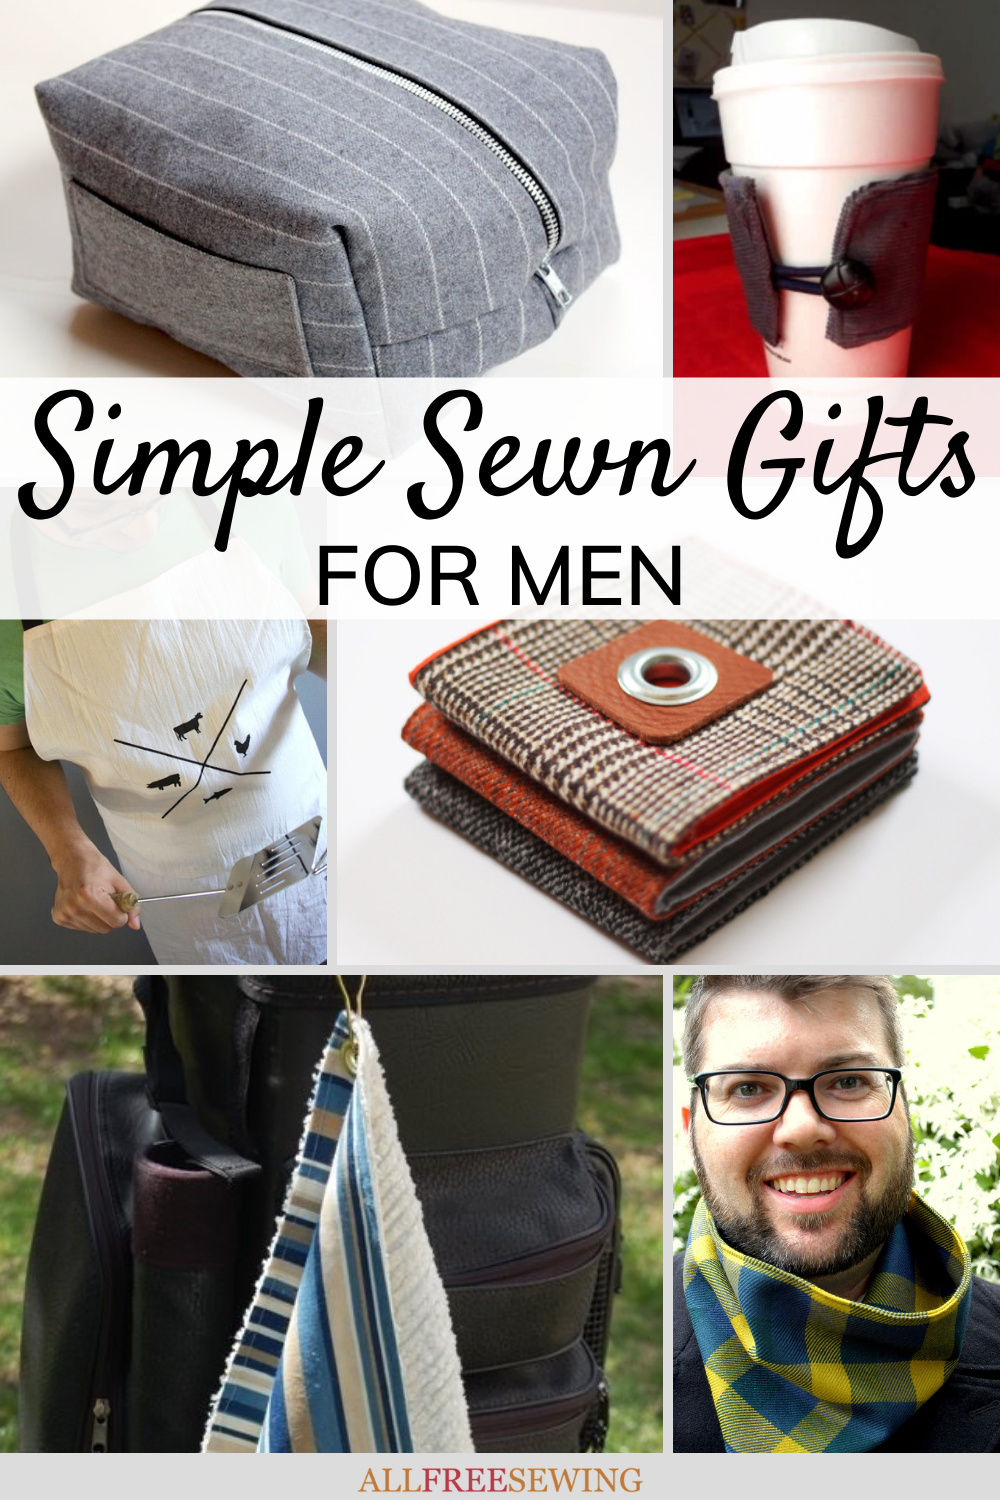 https://irepo.primecp.com/2021/12/512569/Simple-Sewn-Gifts-for-Men-pin21_UserCommentImage_ID-4585423.png?v=4585423